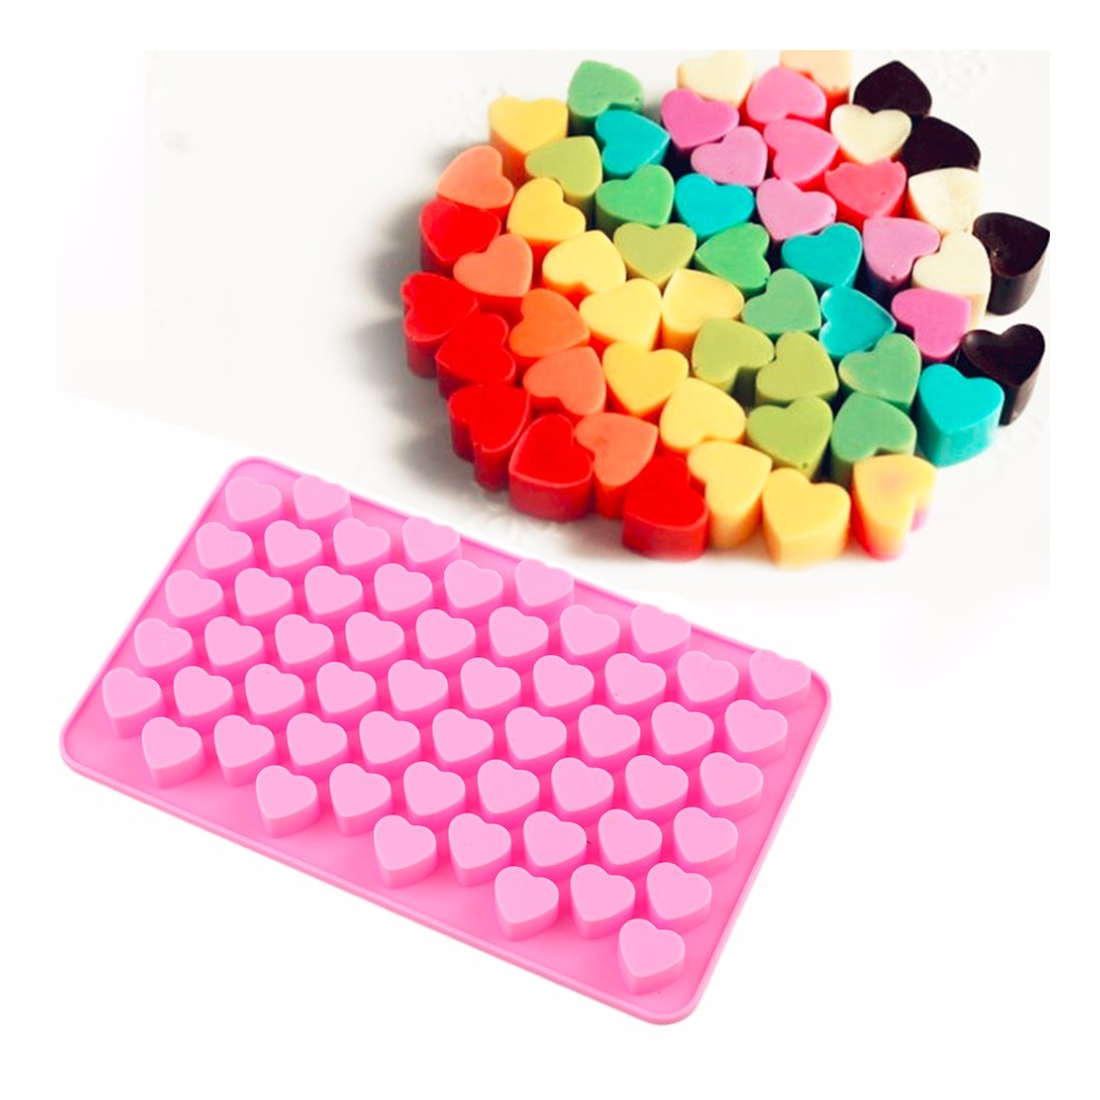 High-quality customized heart-shaped chocolate mold